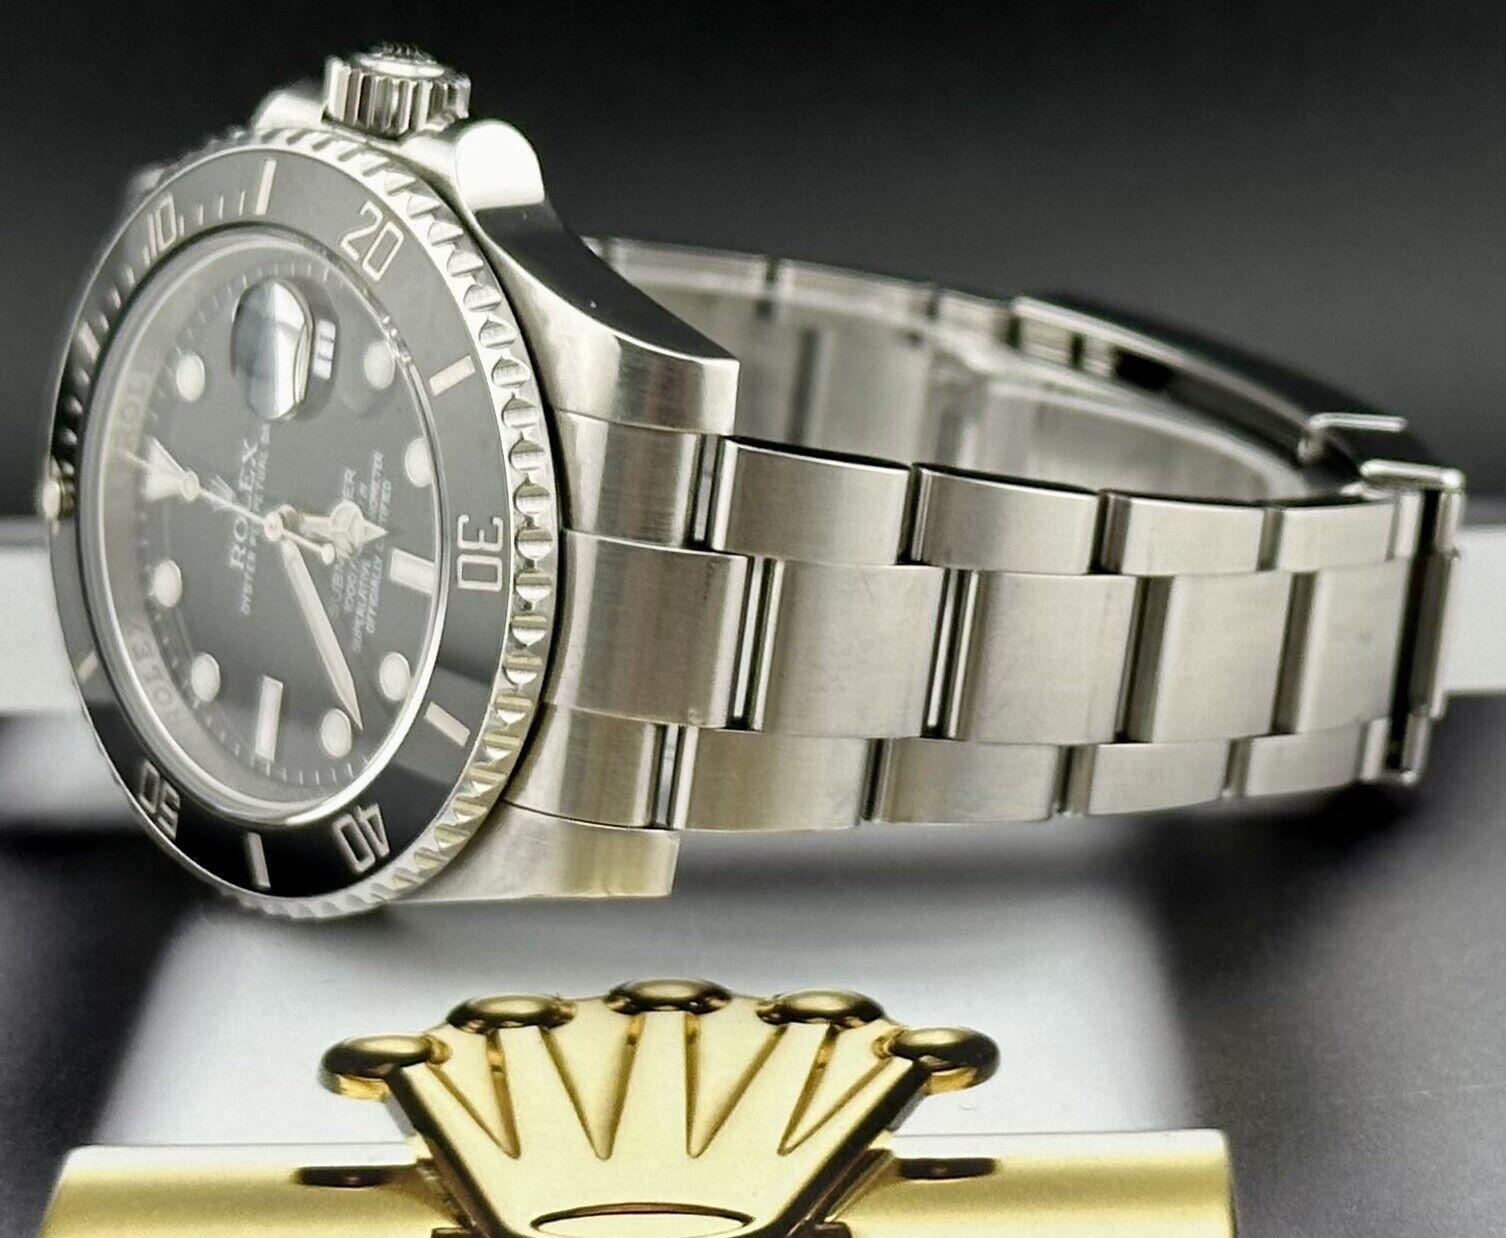 Rolex Submariner Date 40mm Ceramic Stainless Steel Black Dial Men Watch 116610LN For Sale 1